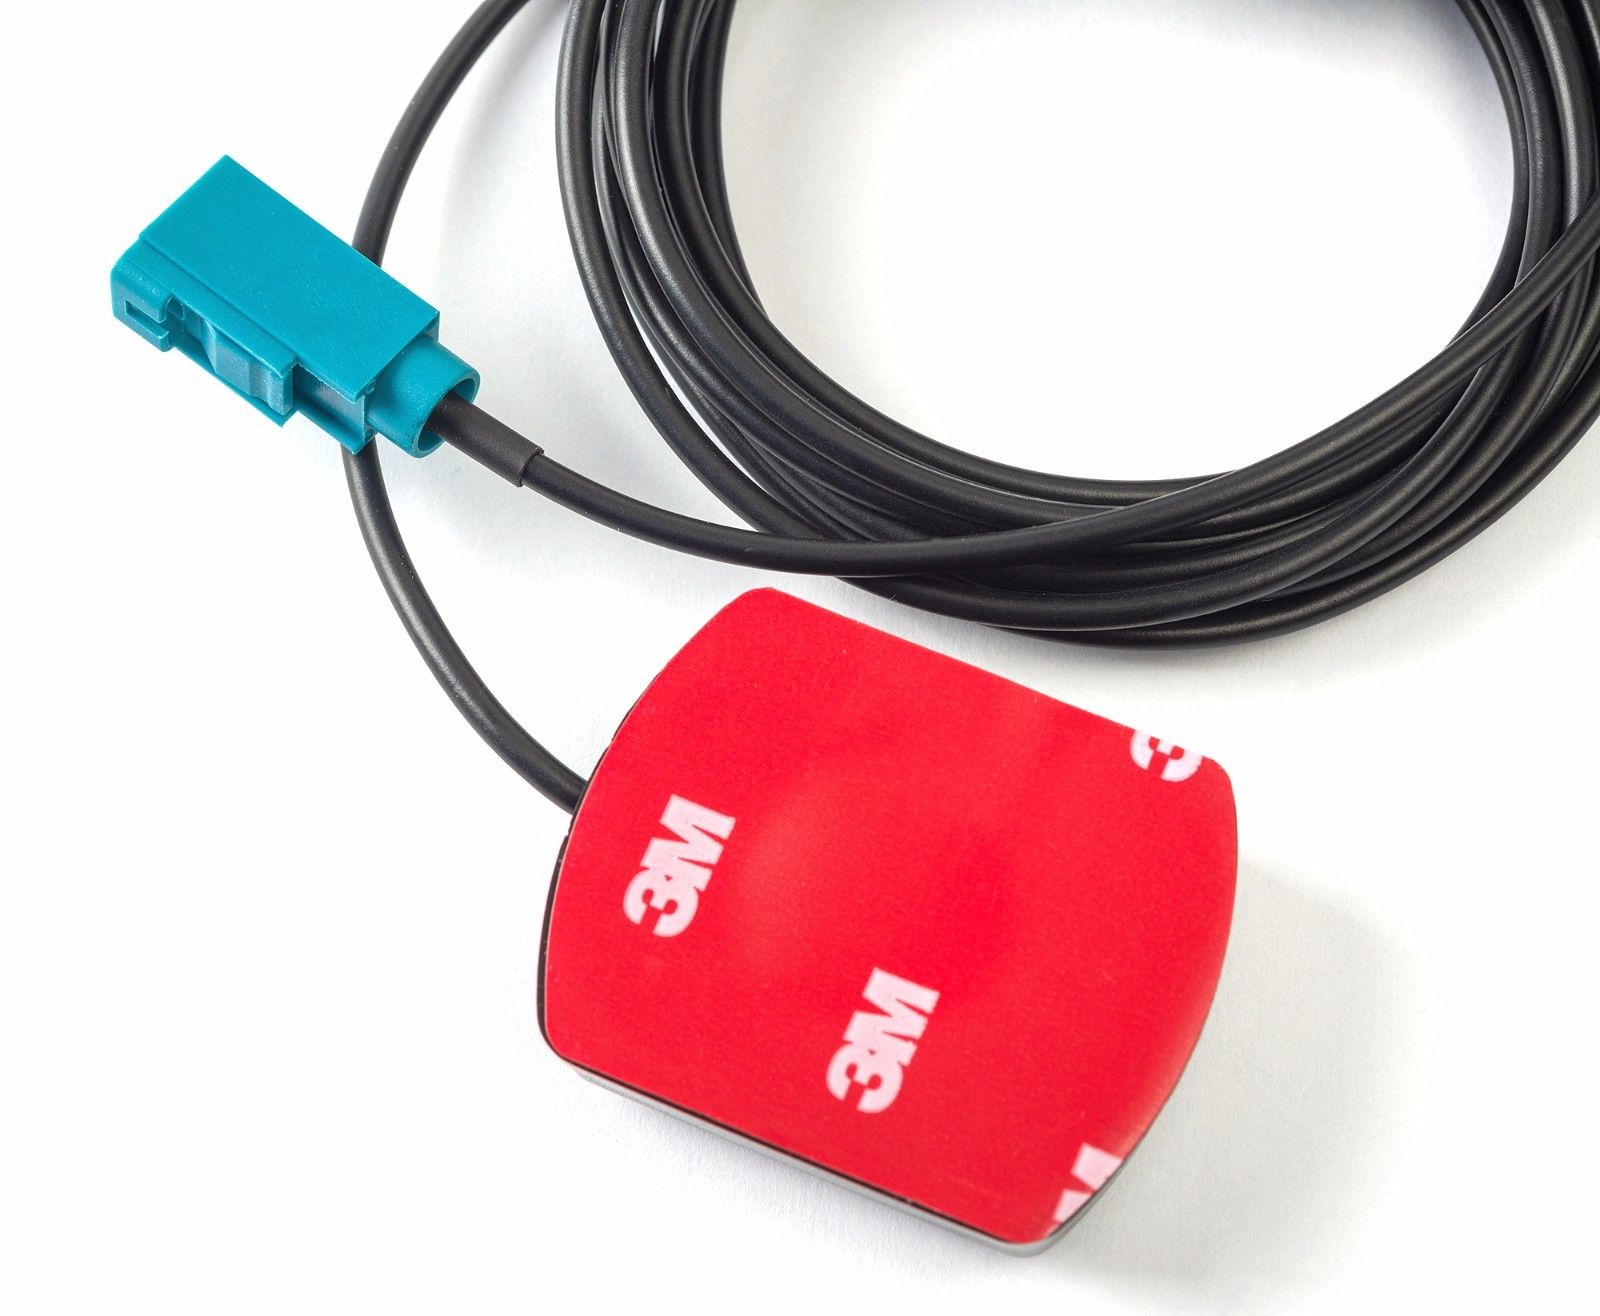 Gps Antenna With Adhesive Mount